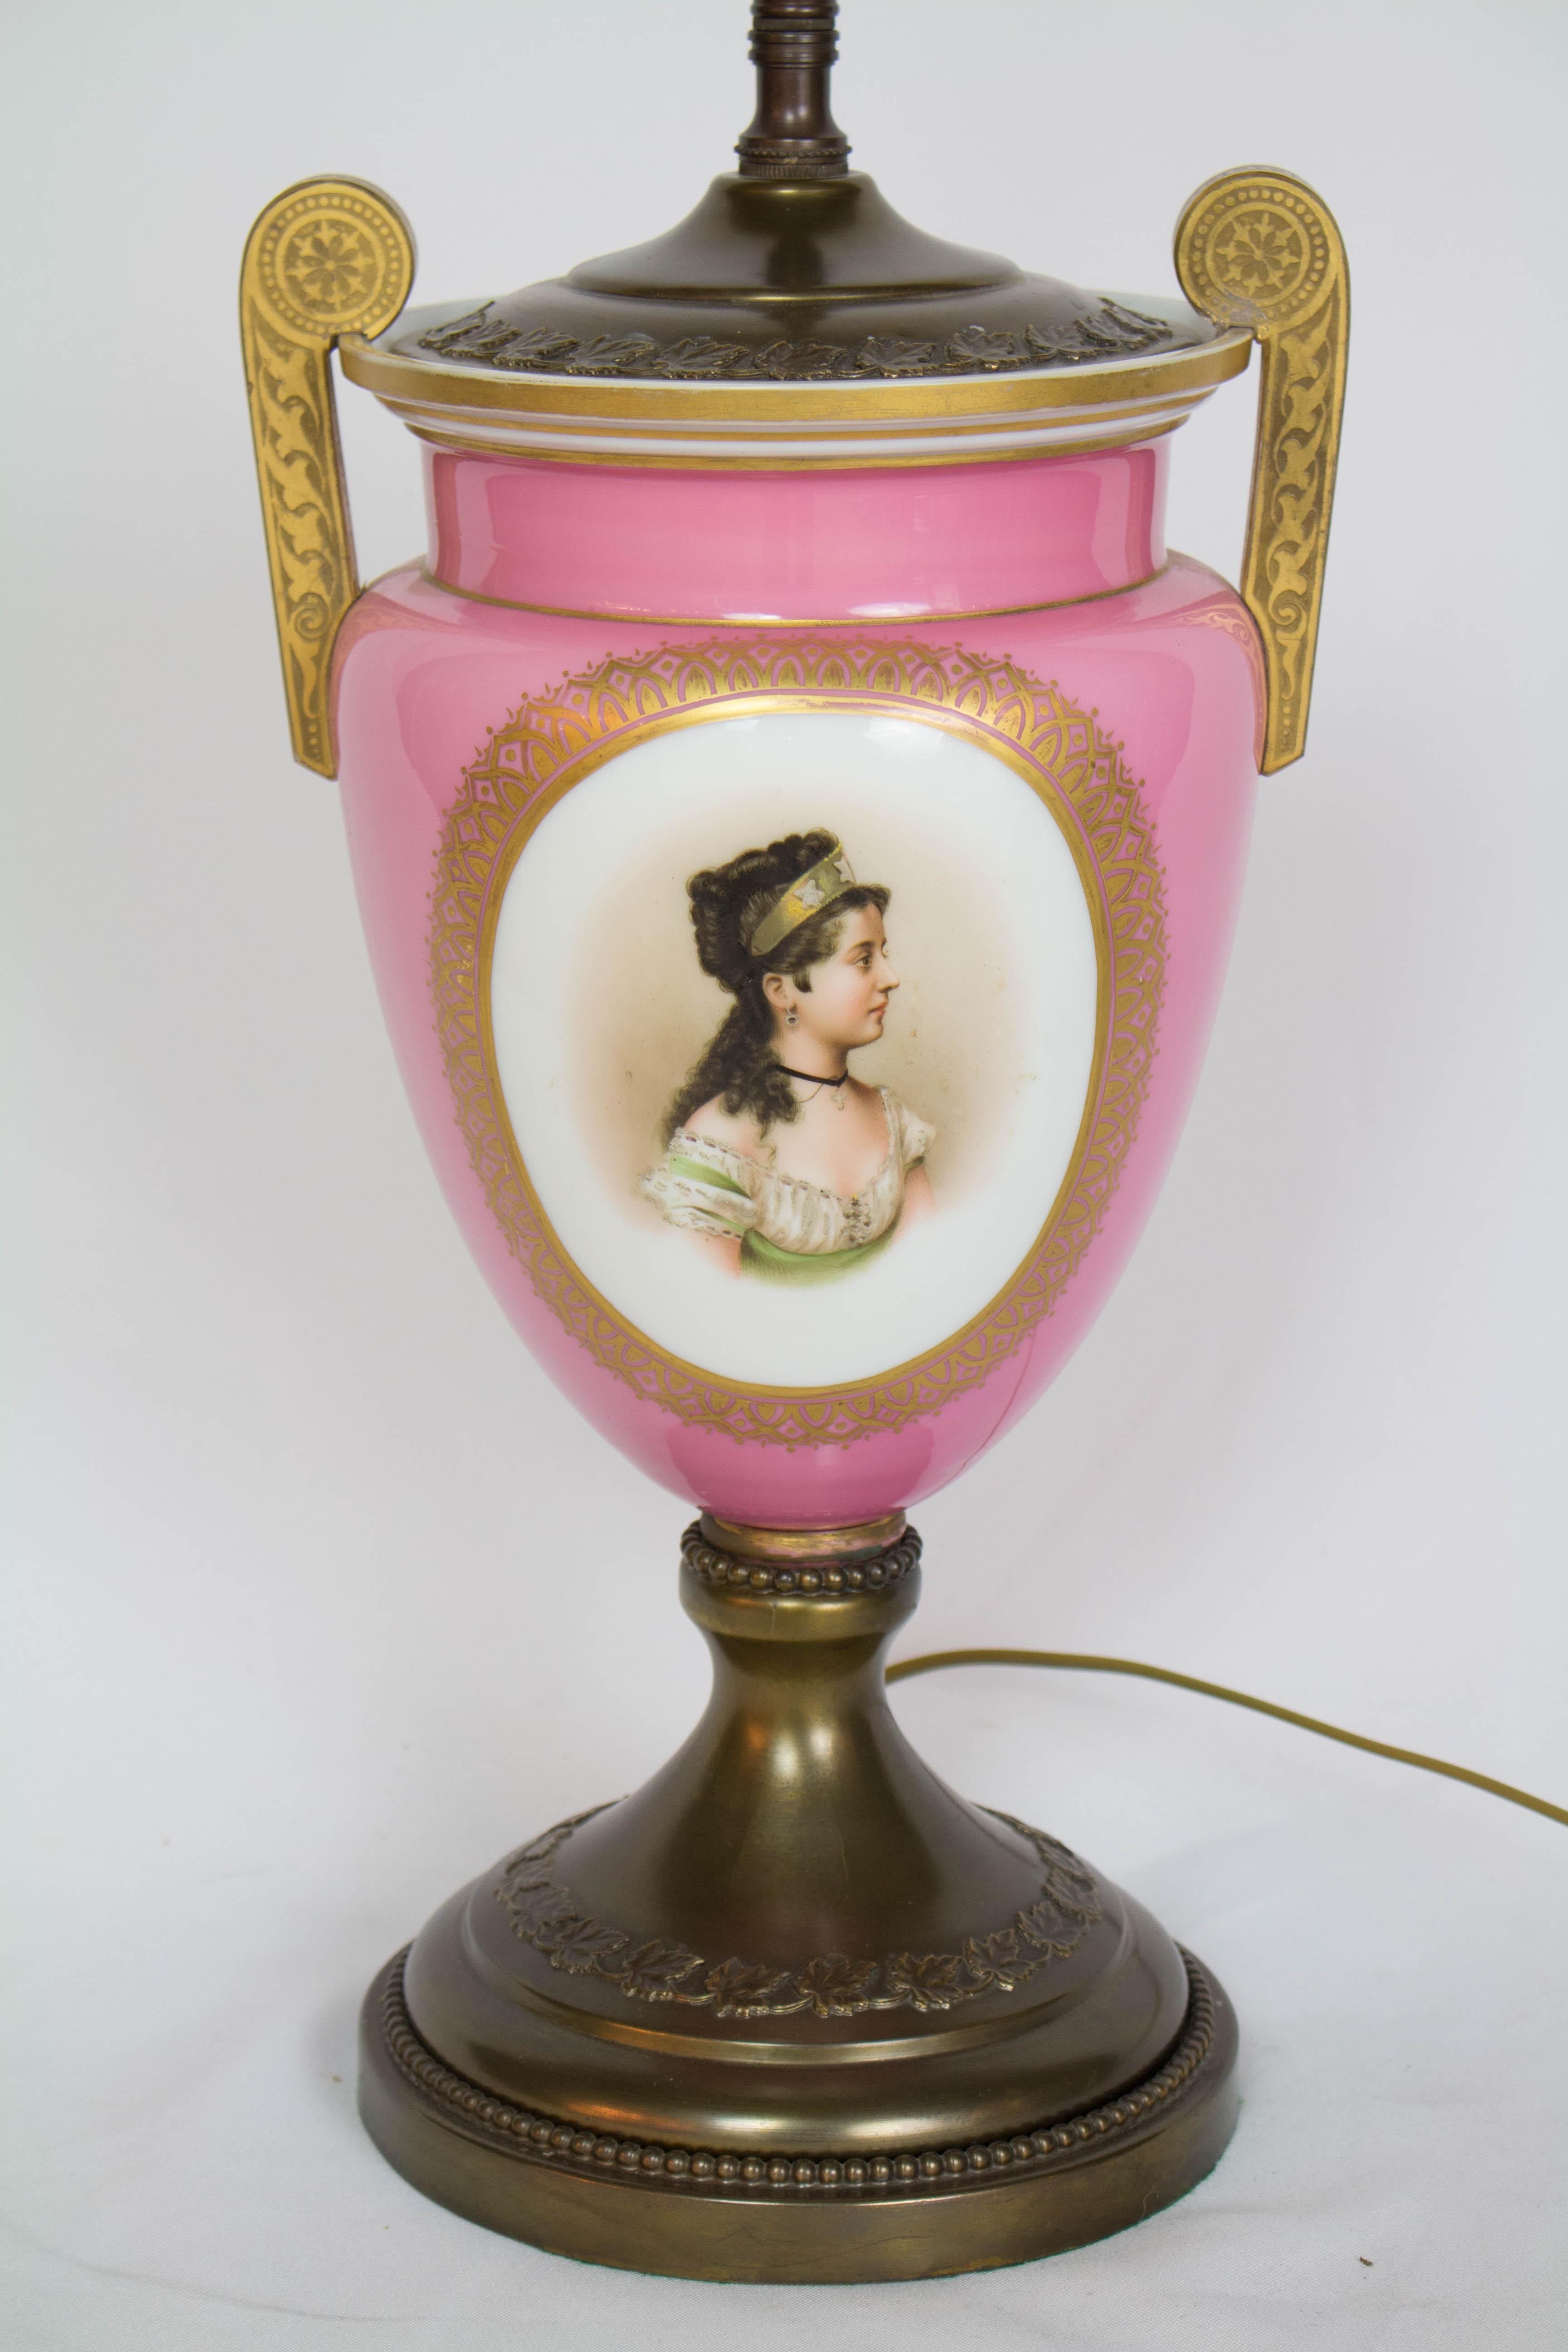 Pink portrait table lamp.  Portrait of a young woman on a cased glass and enamel urn with metal base.  The portrait was made with very fine detail with a detailed gold border.  Bohemian, 19th Century, C. 1880.  Made into a lamp in the early 20th